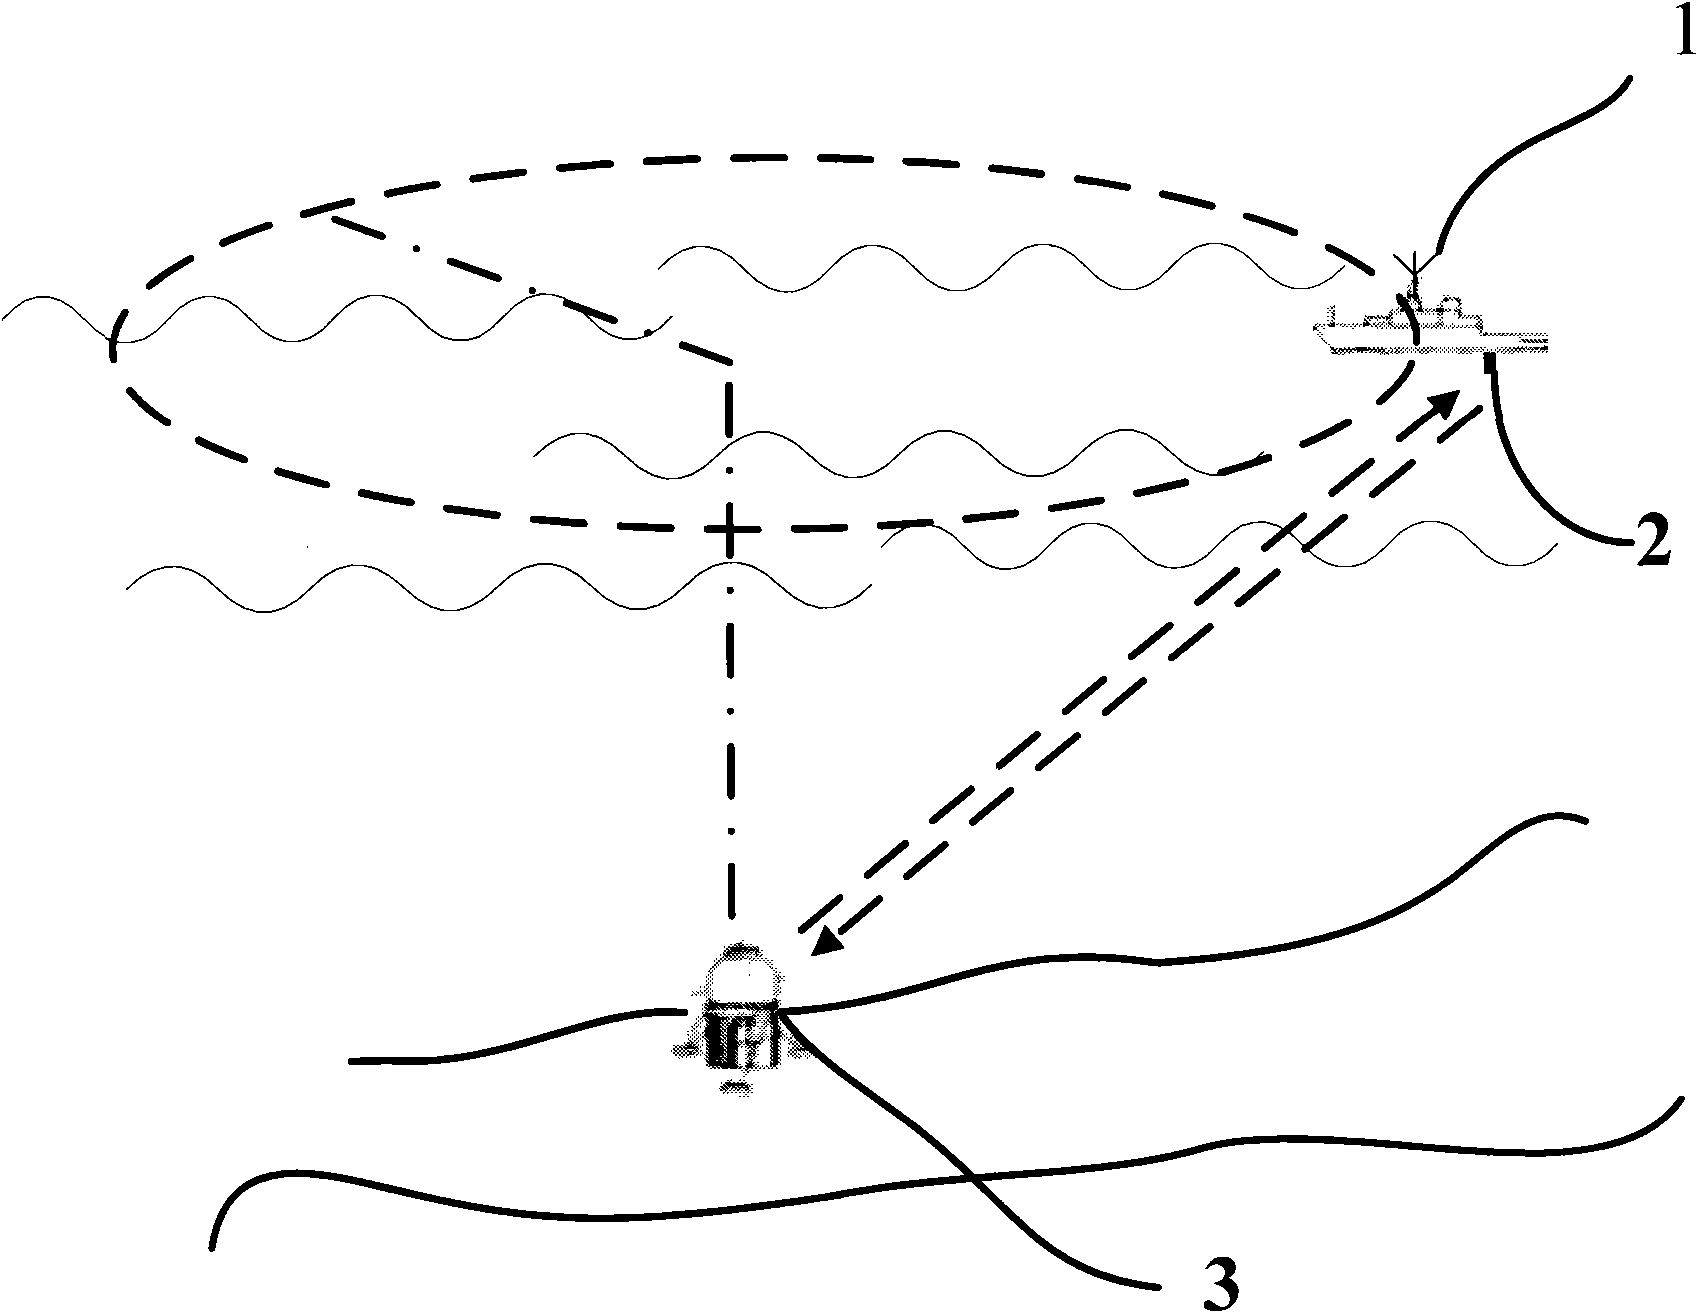 Method for precise calibration of absolute position of deep sea underwater transponder